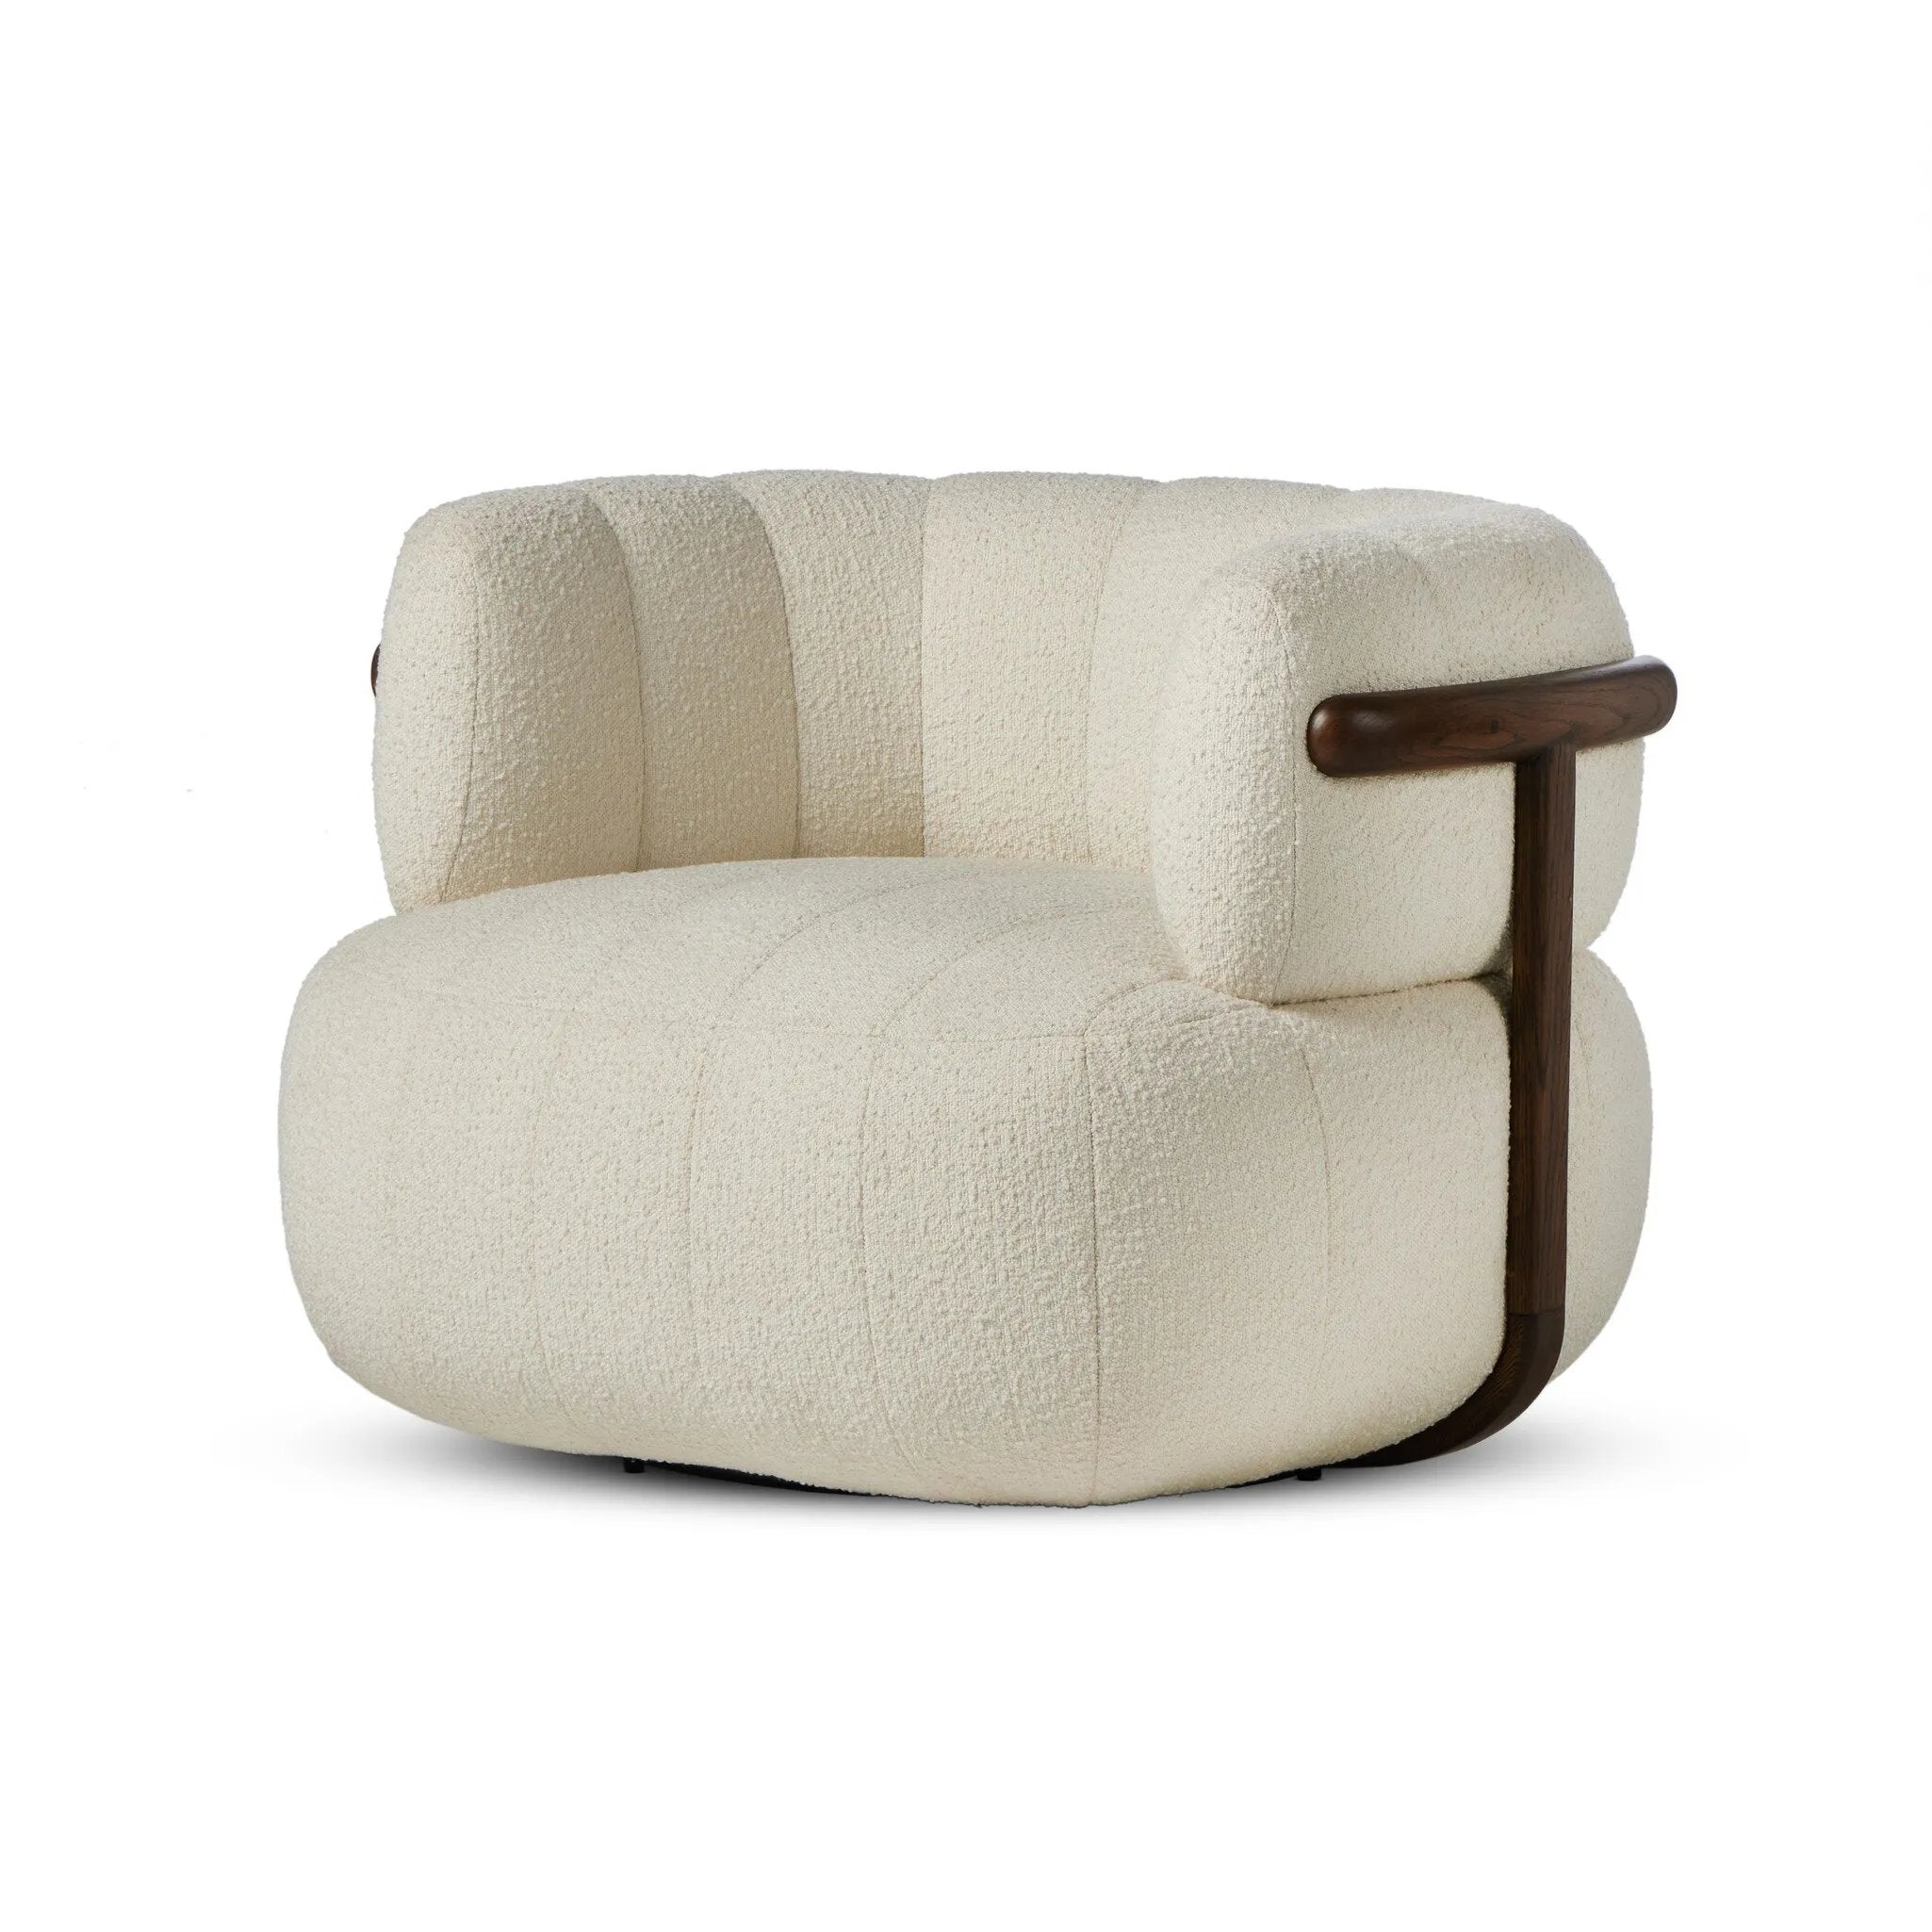 The ultimate in polished media style seating has arrived. Framed in oak, this 360-degree swivel chair is constructed with two separate pieces â€” the seat and the back. The piece features evenly spaced spring suspension and a soft snow textile stitched into 5.5-inch channels for stylish comfort.Collection: Farro Amethyst Home provides interior design, new home construction design consulting, vintage area rugs, and lighting in the Portland metro area.